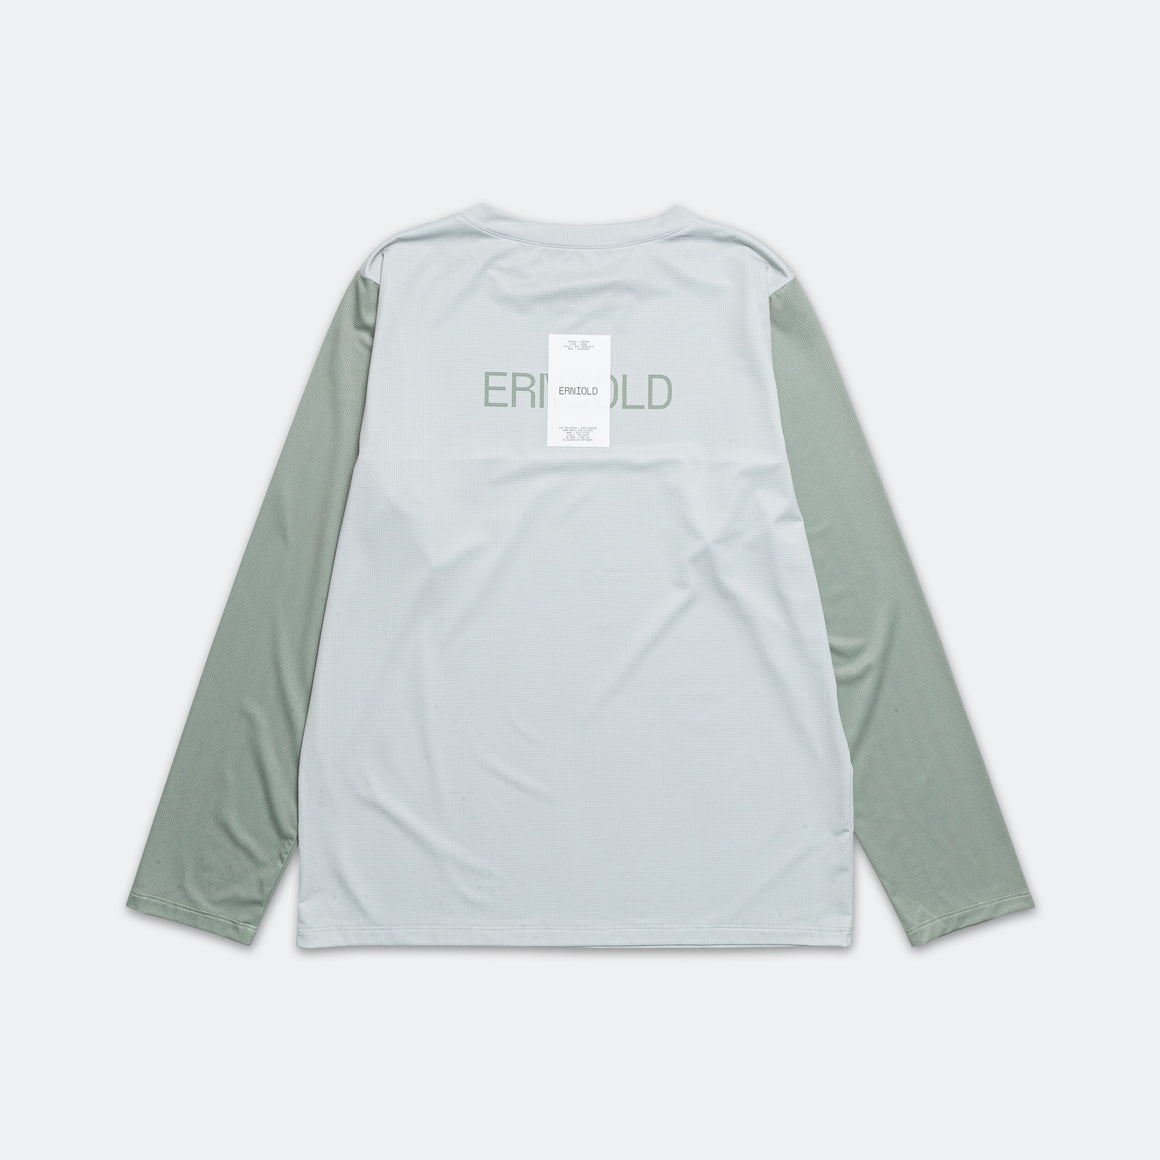 Erniold - Womens Run L/S Tee - Light Moss - Up There Athletics